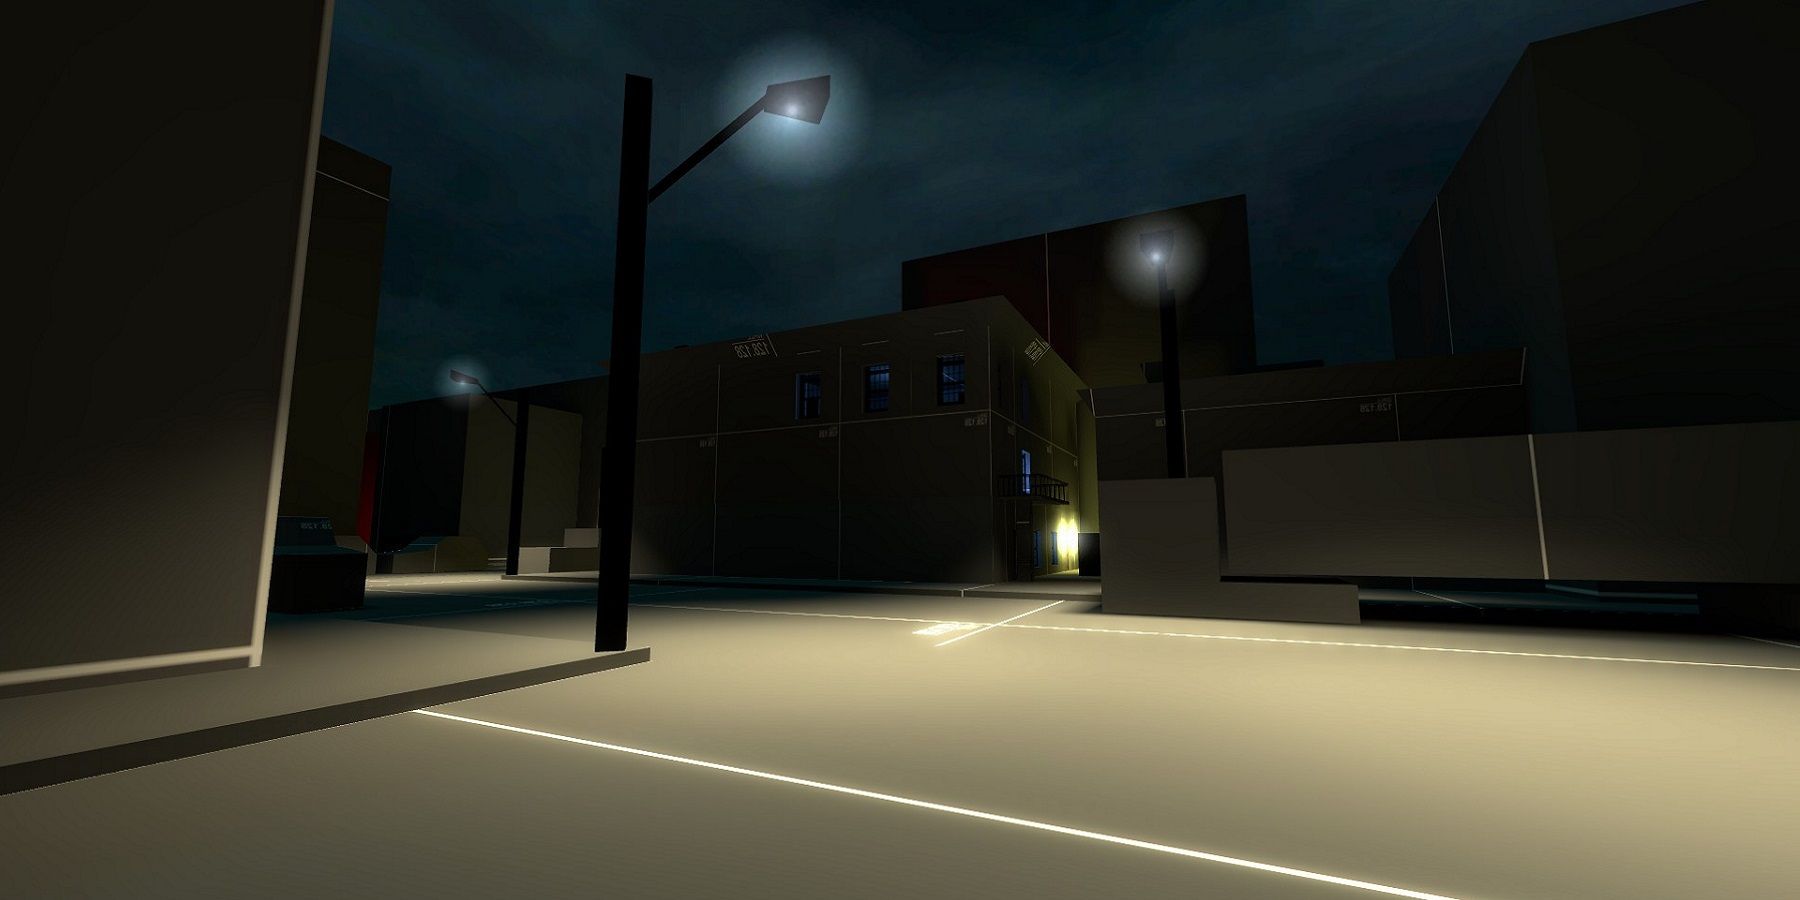 Image from a Left 4 Dead protototype showing a bland street area at night.